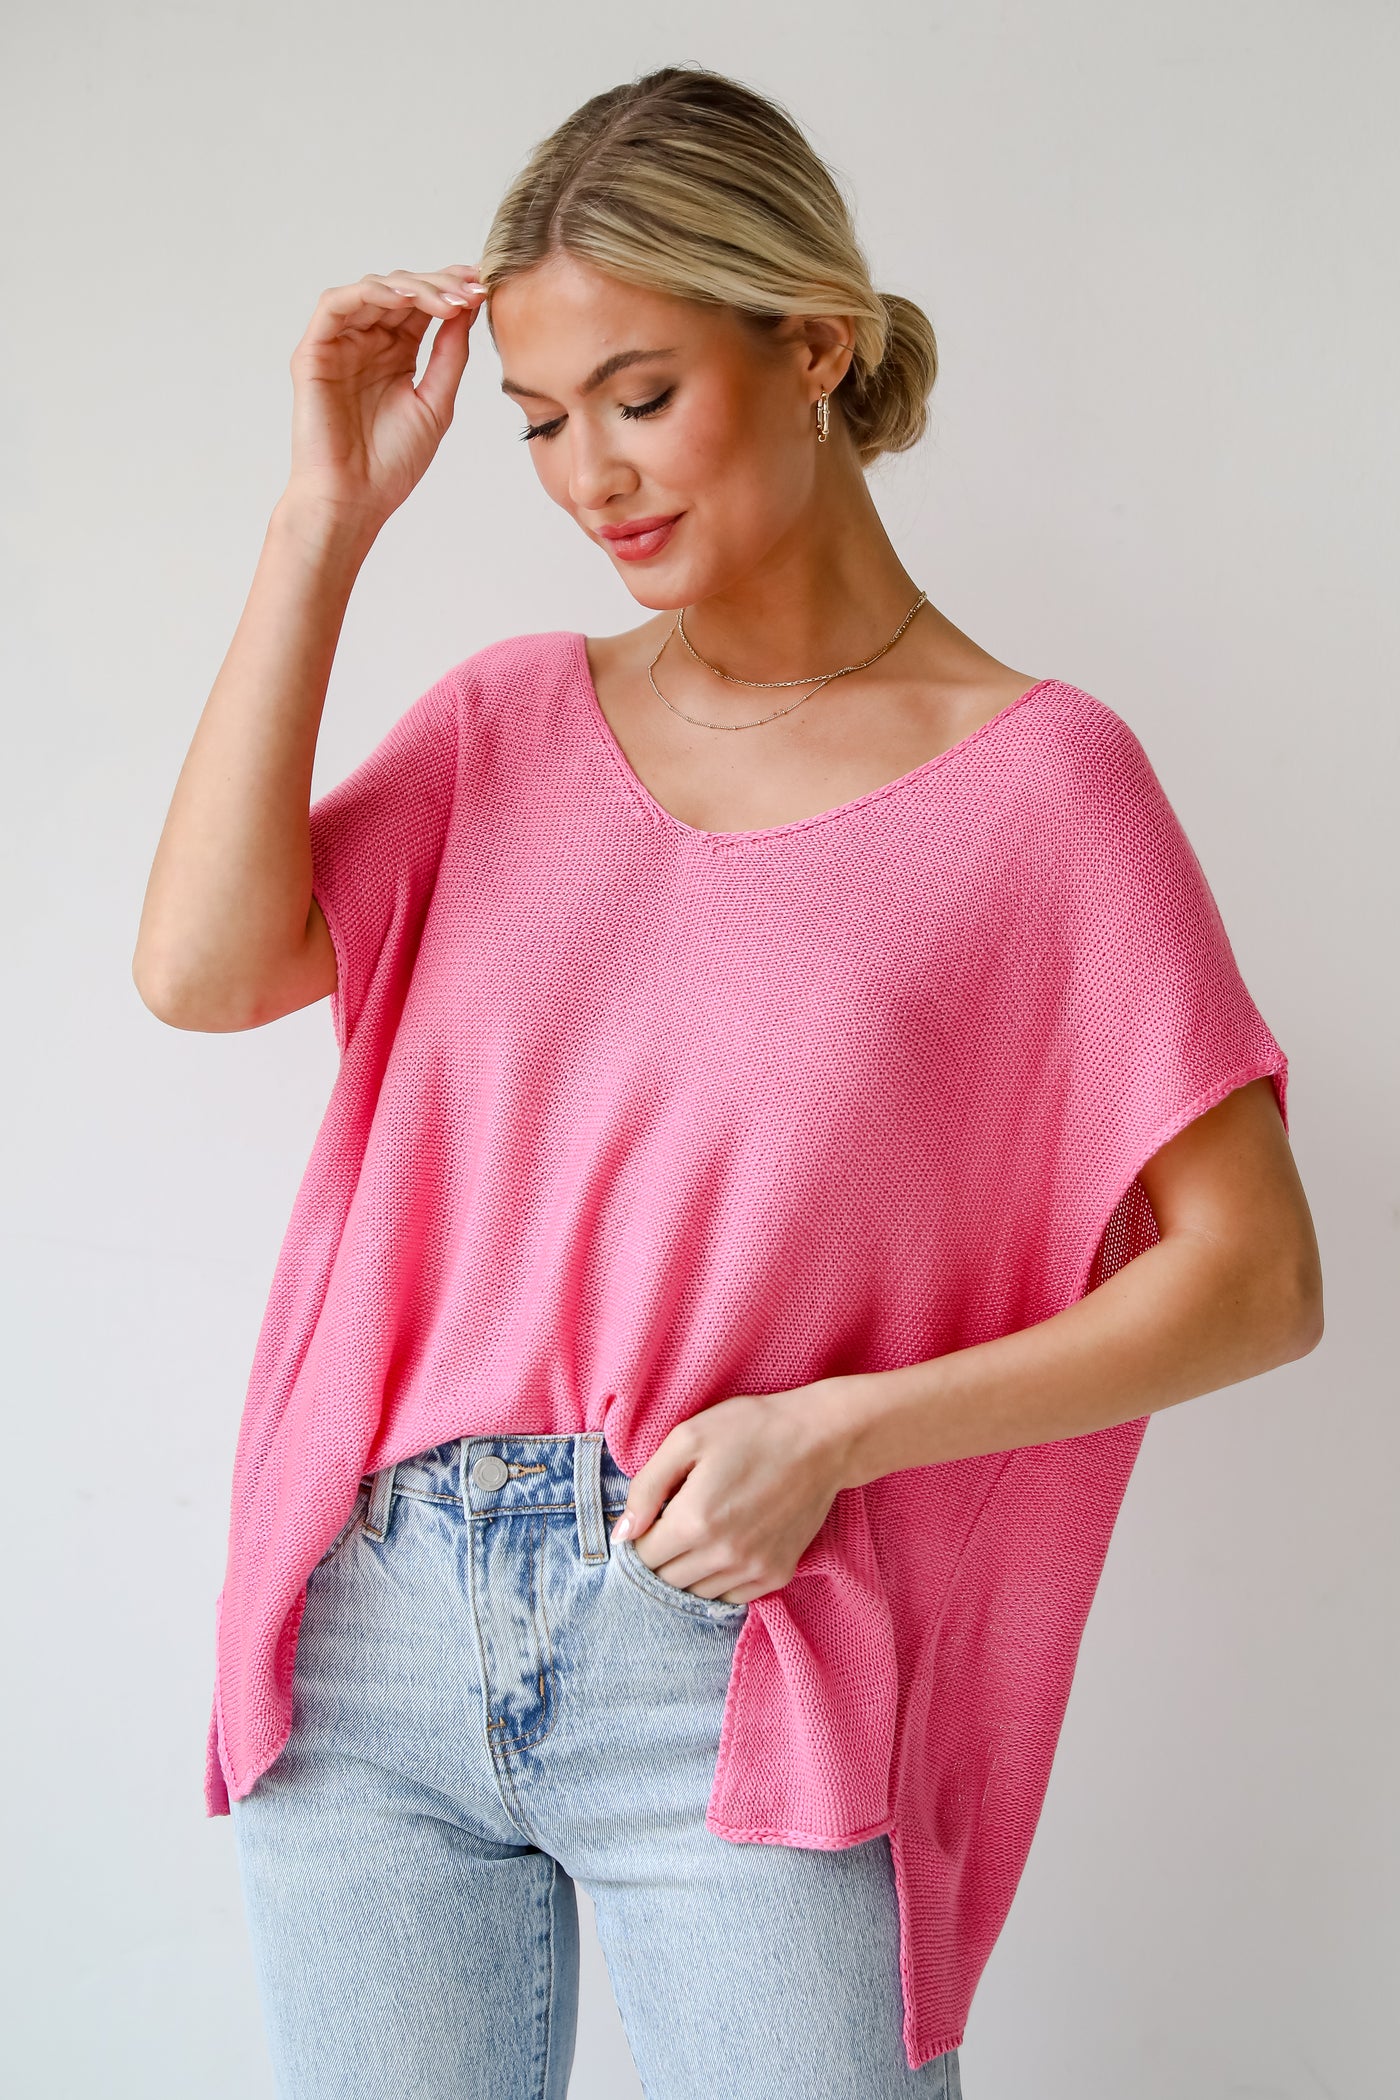 pink Lightweight Knit Top. Eliza Lightweight Knit Top is the perfect spring sweater. Lightweight knit sweater, with v-neck, short sleeves, and oversized fit. Pairs well with denim. Online boutique. 